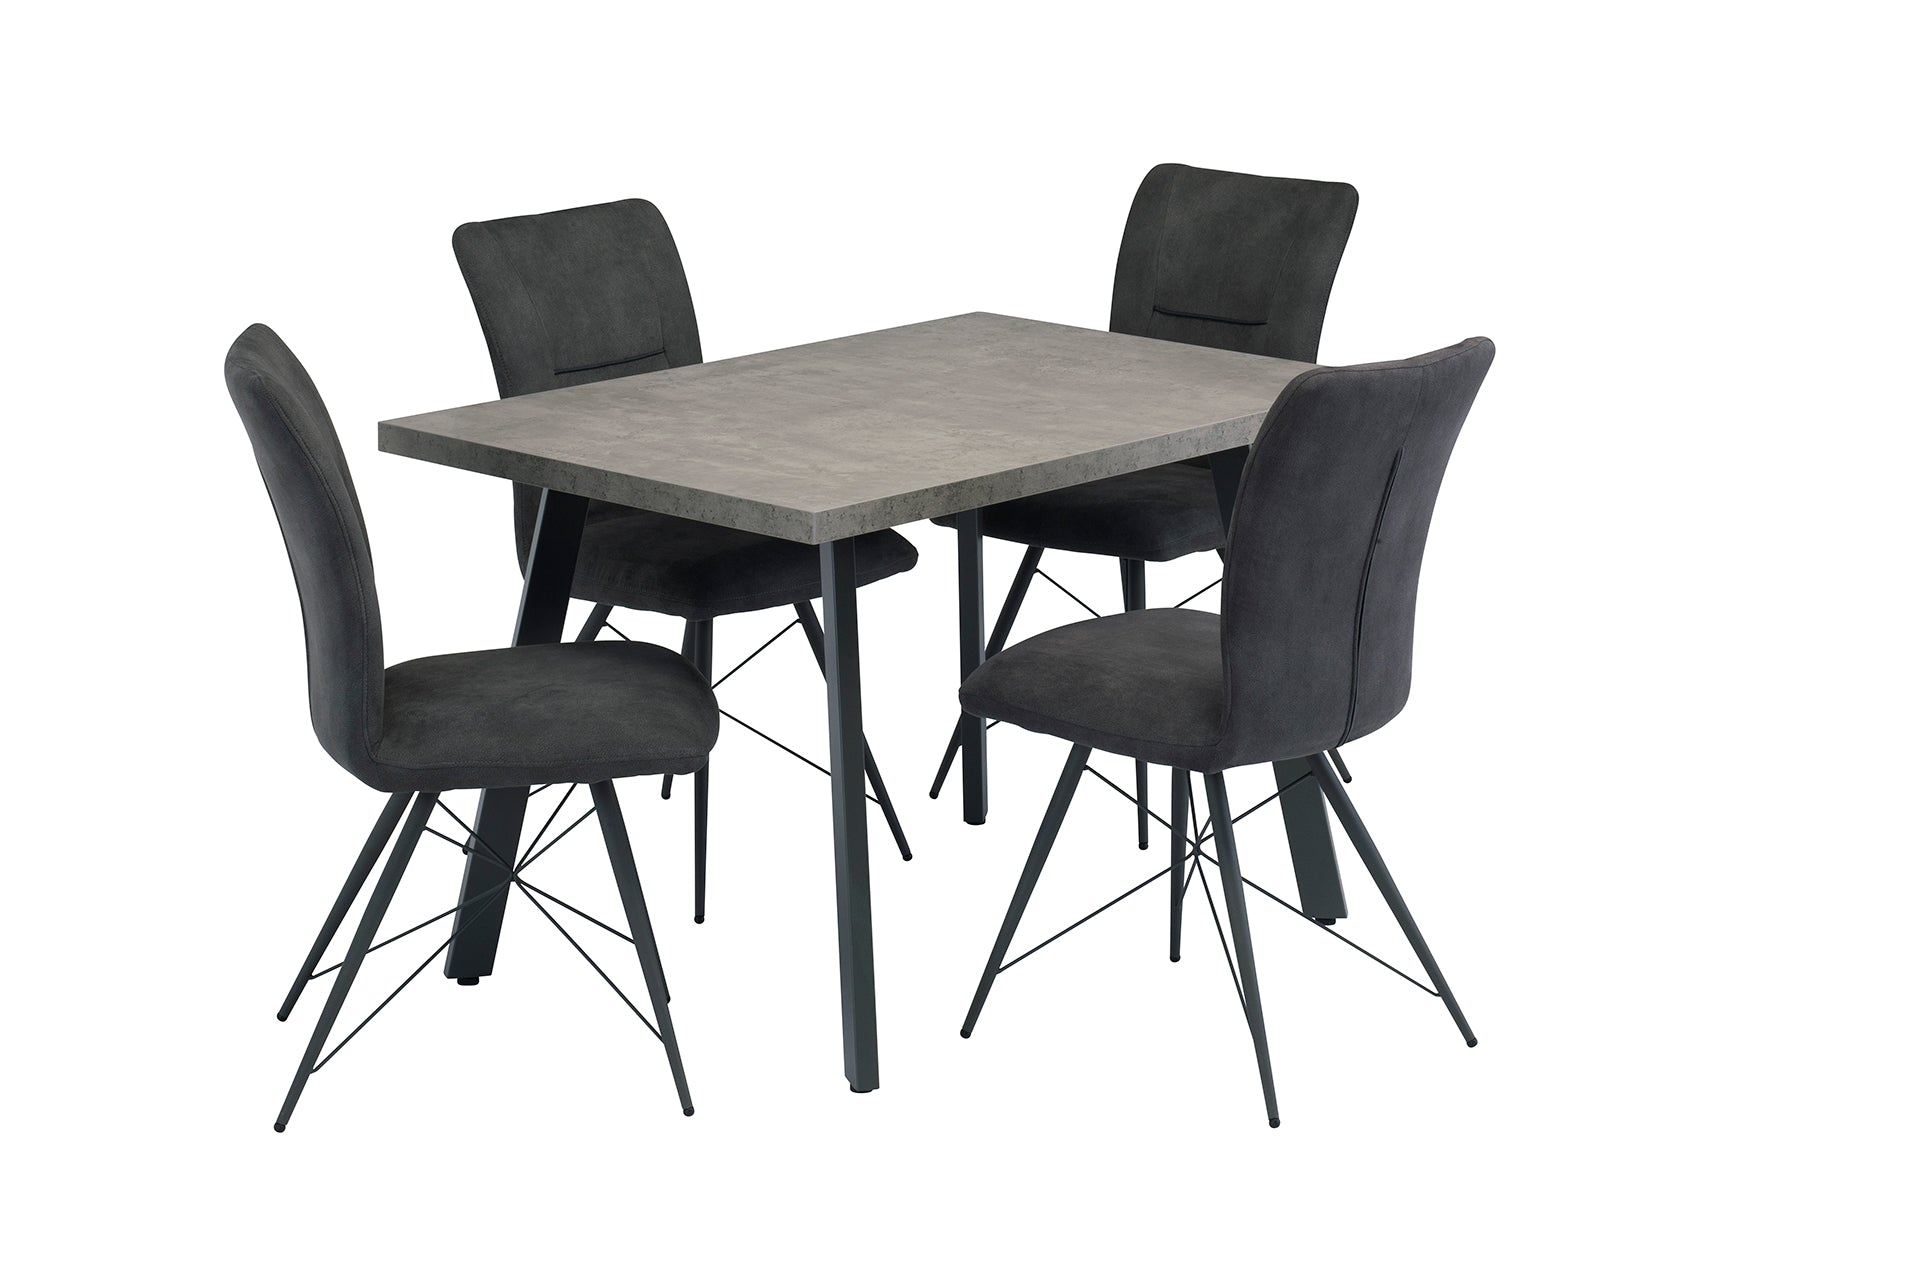 4 Seater dining table chairs